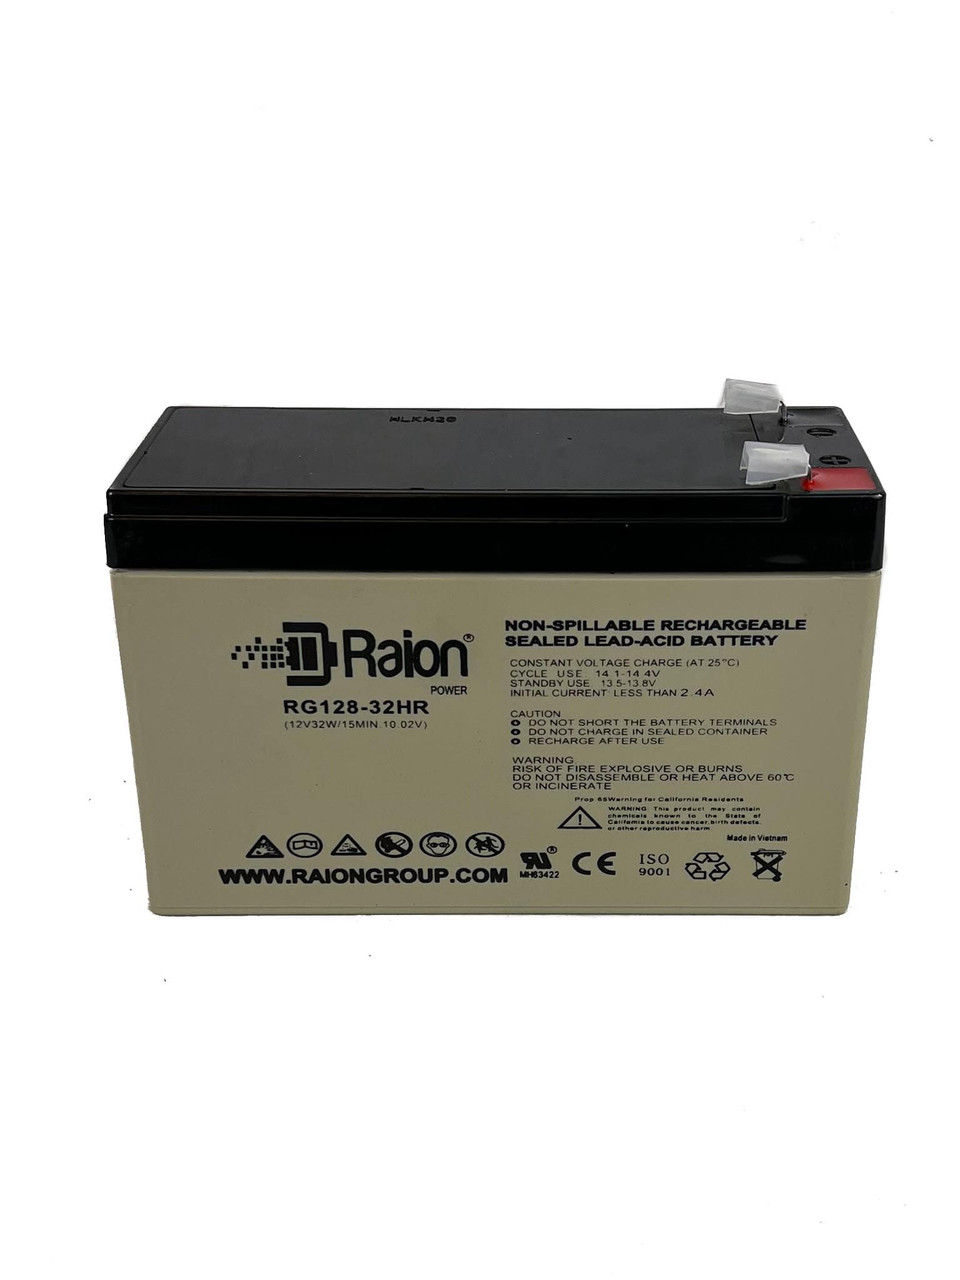 Raion Power RG128-32HR Replacement High Rate Battery Cartridge for Belkin F6C750-AVR